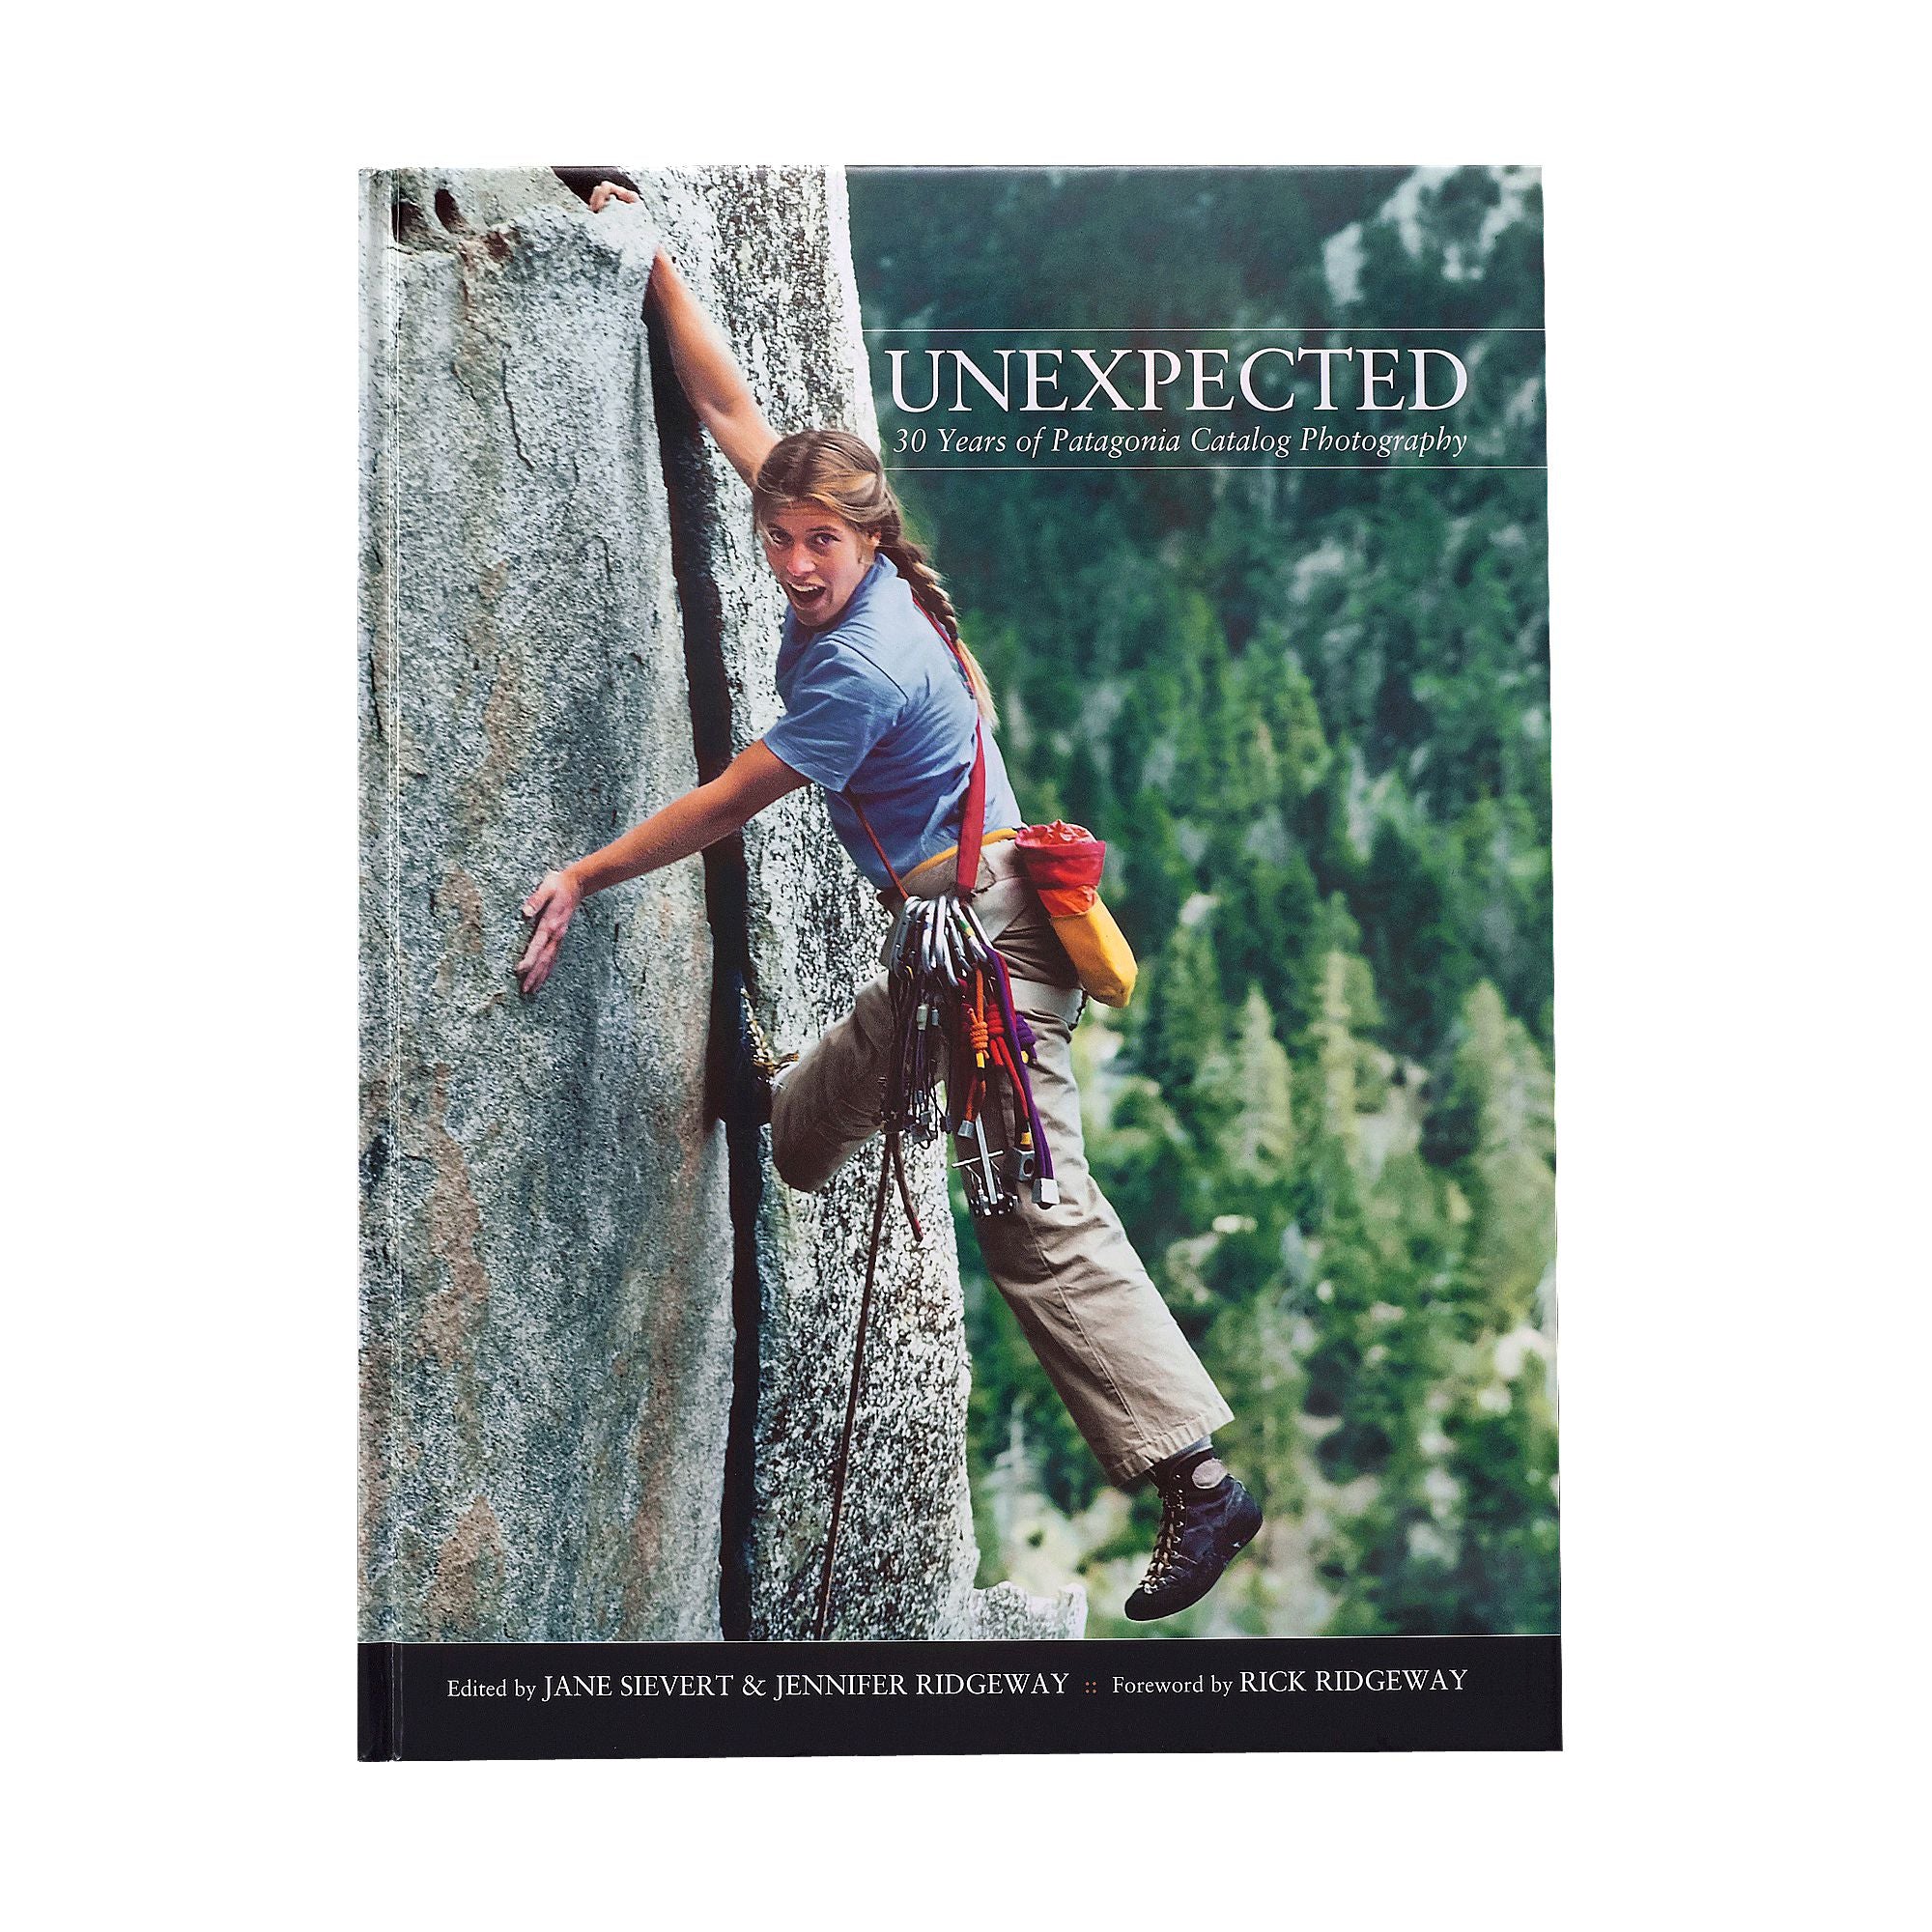 PATAGONIA 『Unexpected: 30 Years Of Patagonia Catalog Photography』日本語版